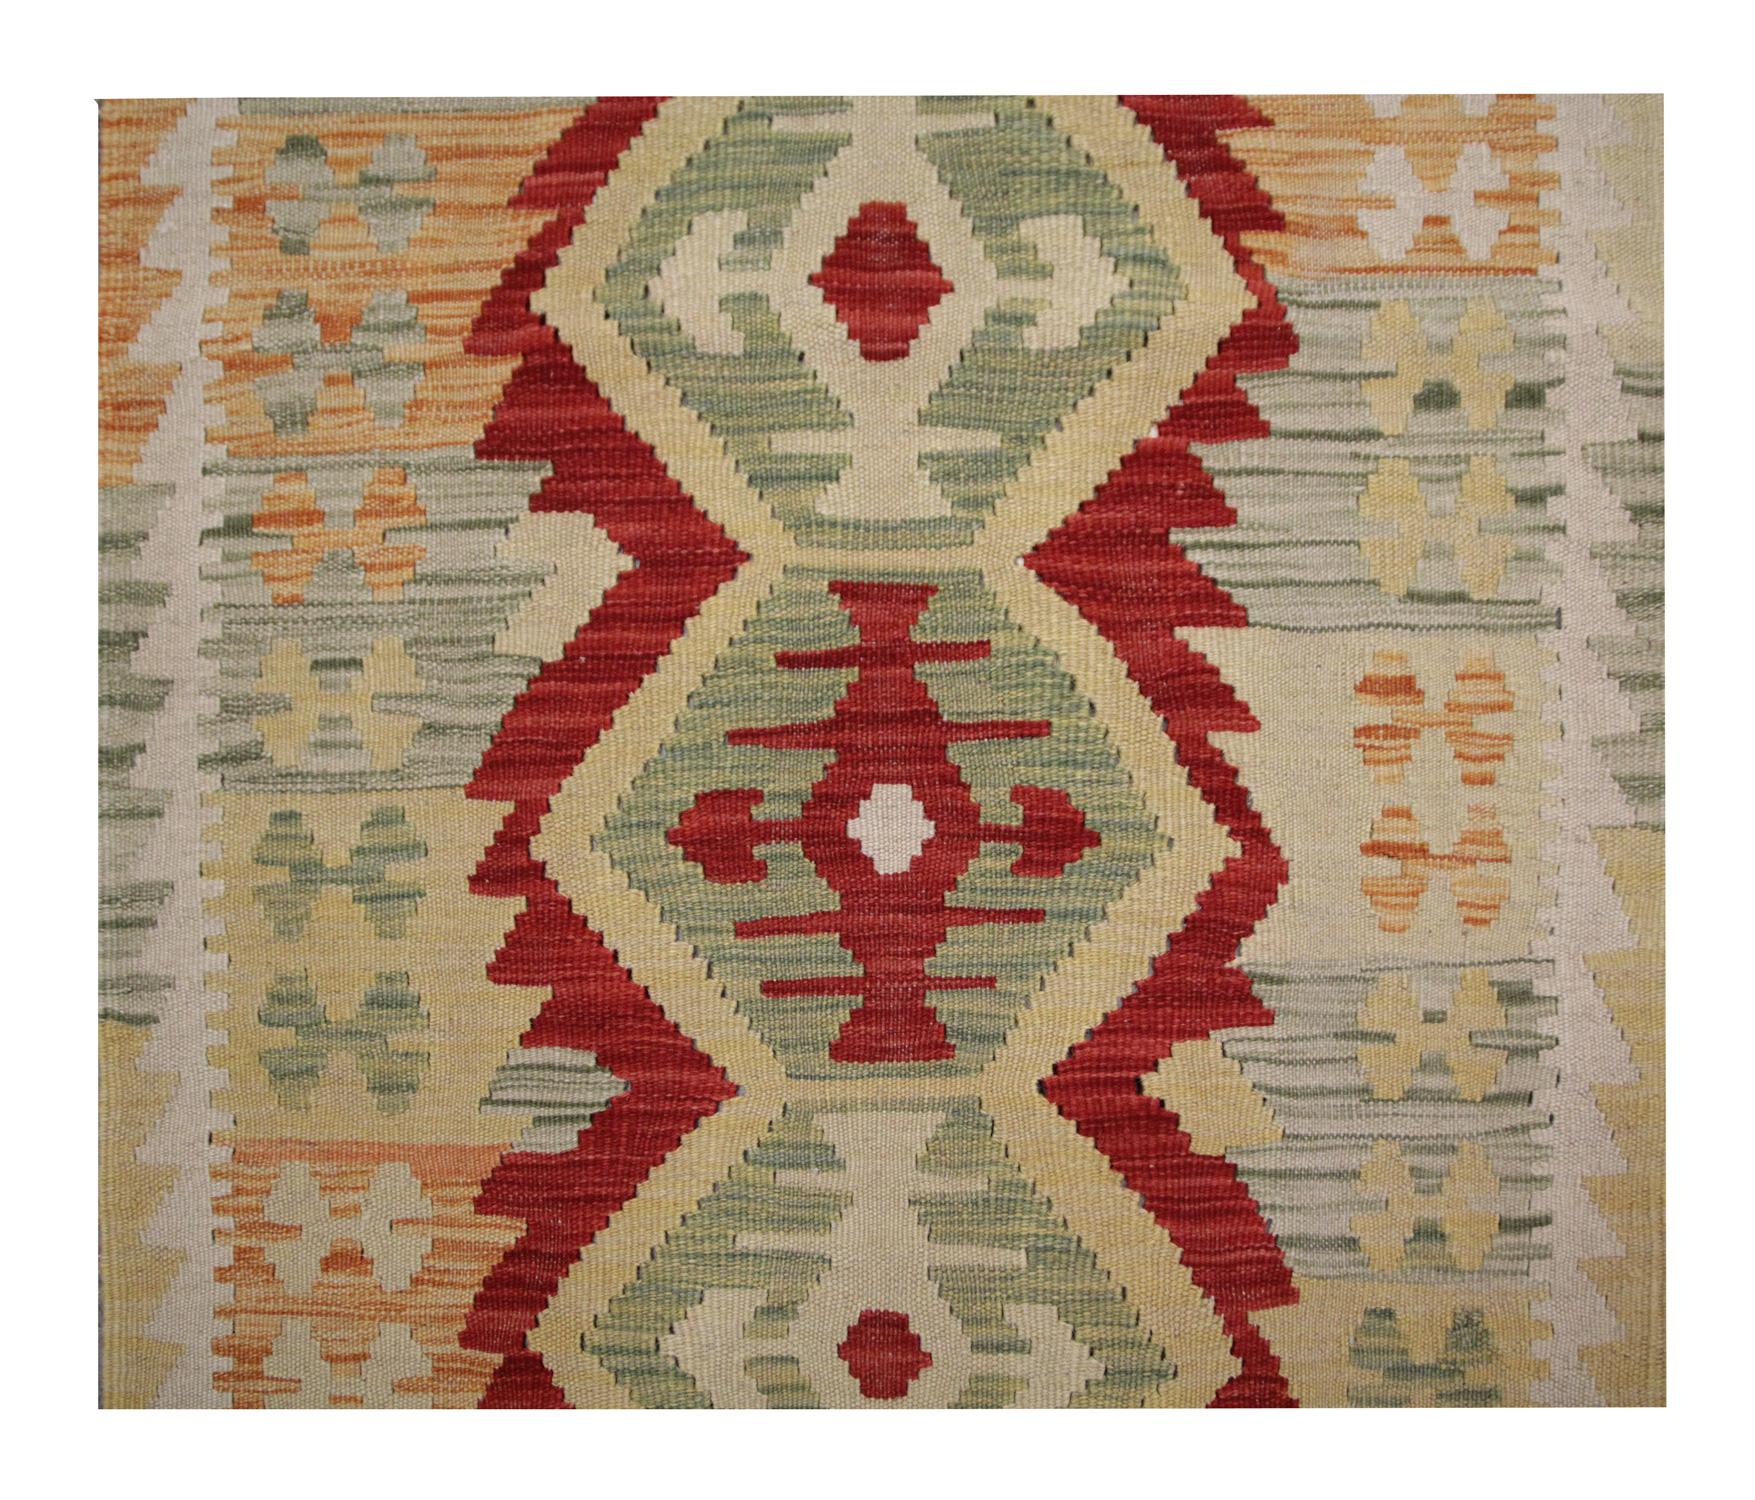 Hand-Crafted Traditional Kilims Handwoven Kilim Rug Runner, Long Green Carpet Wool Rug